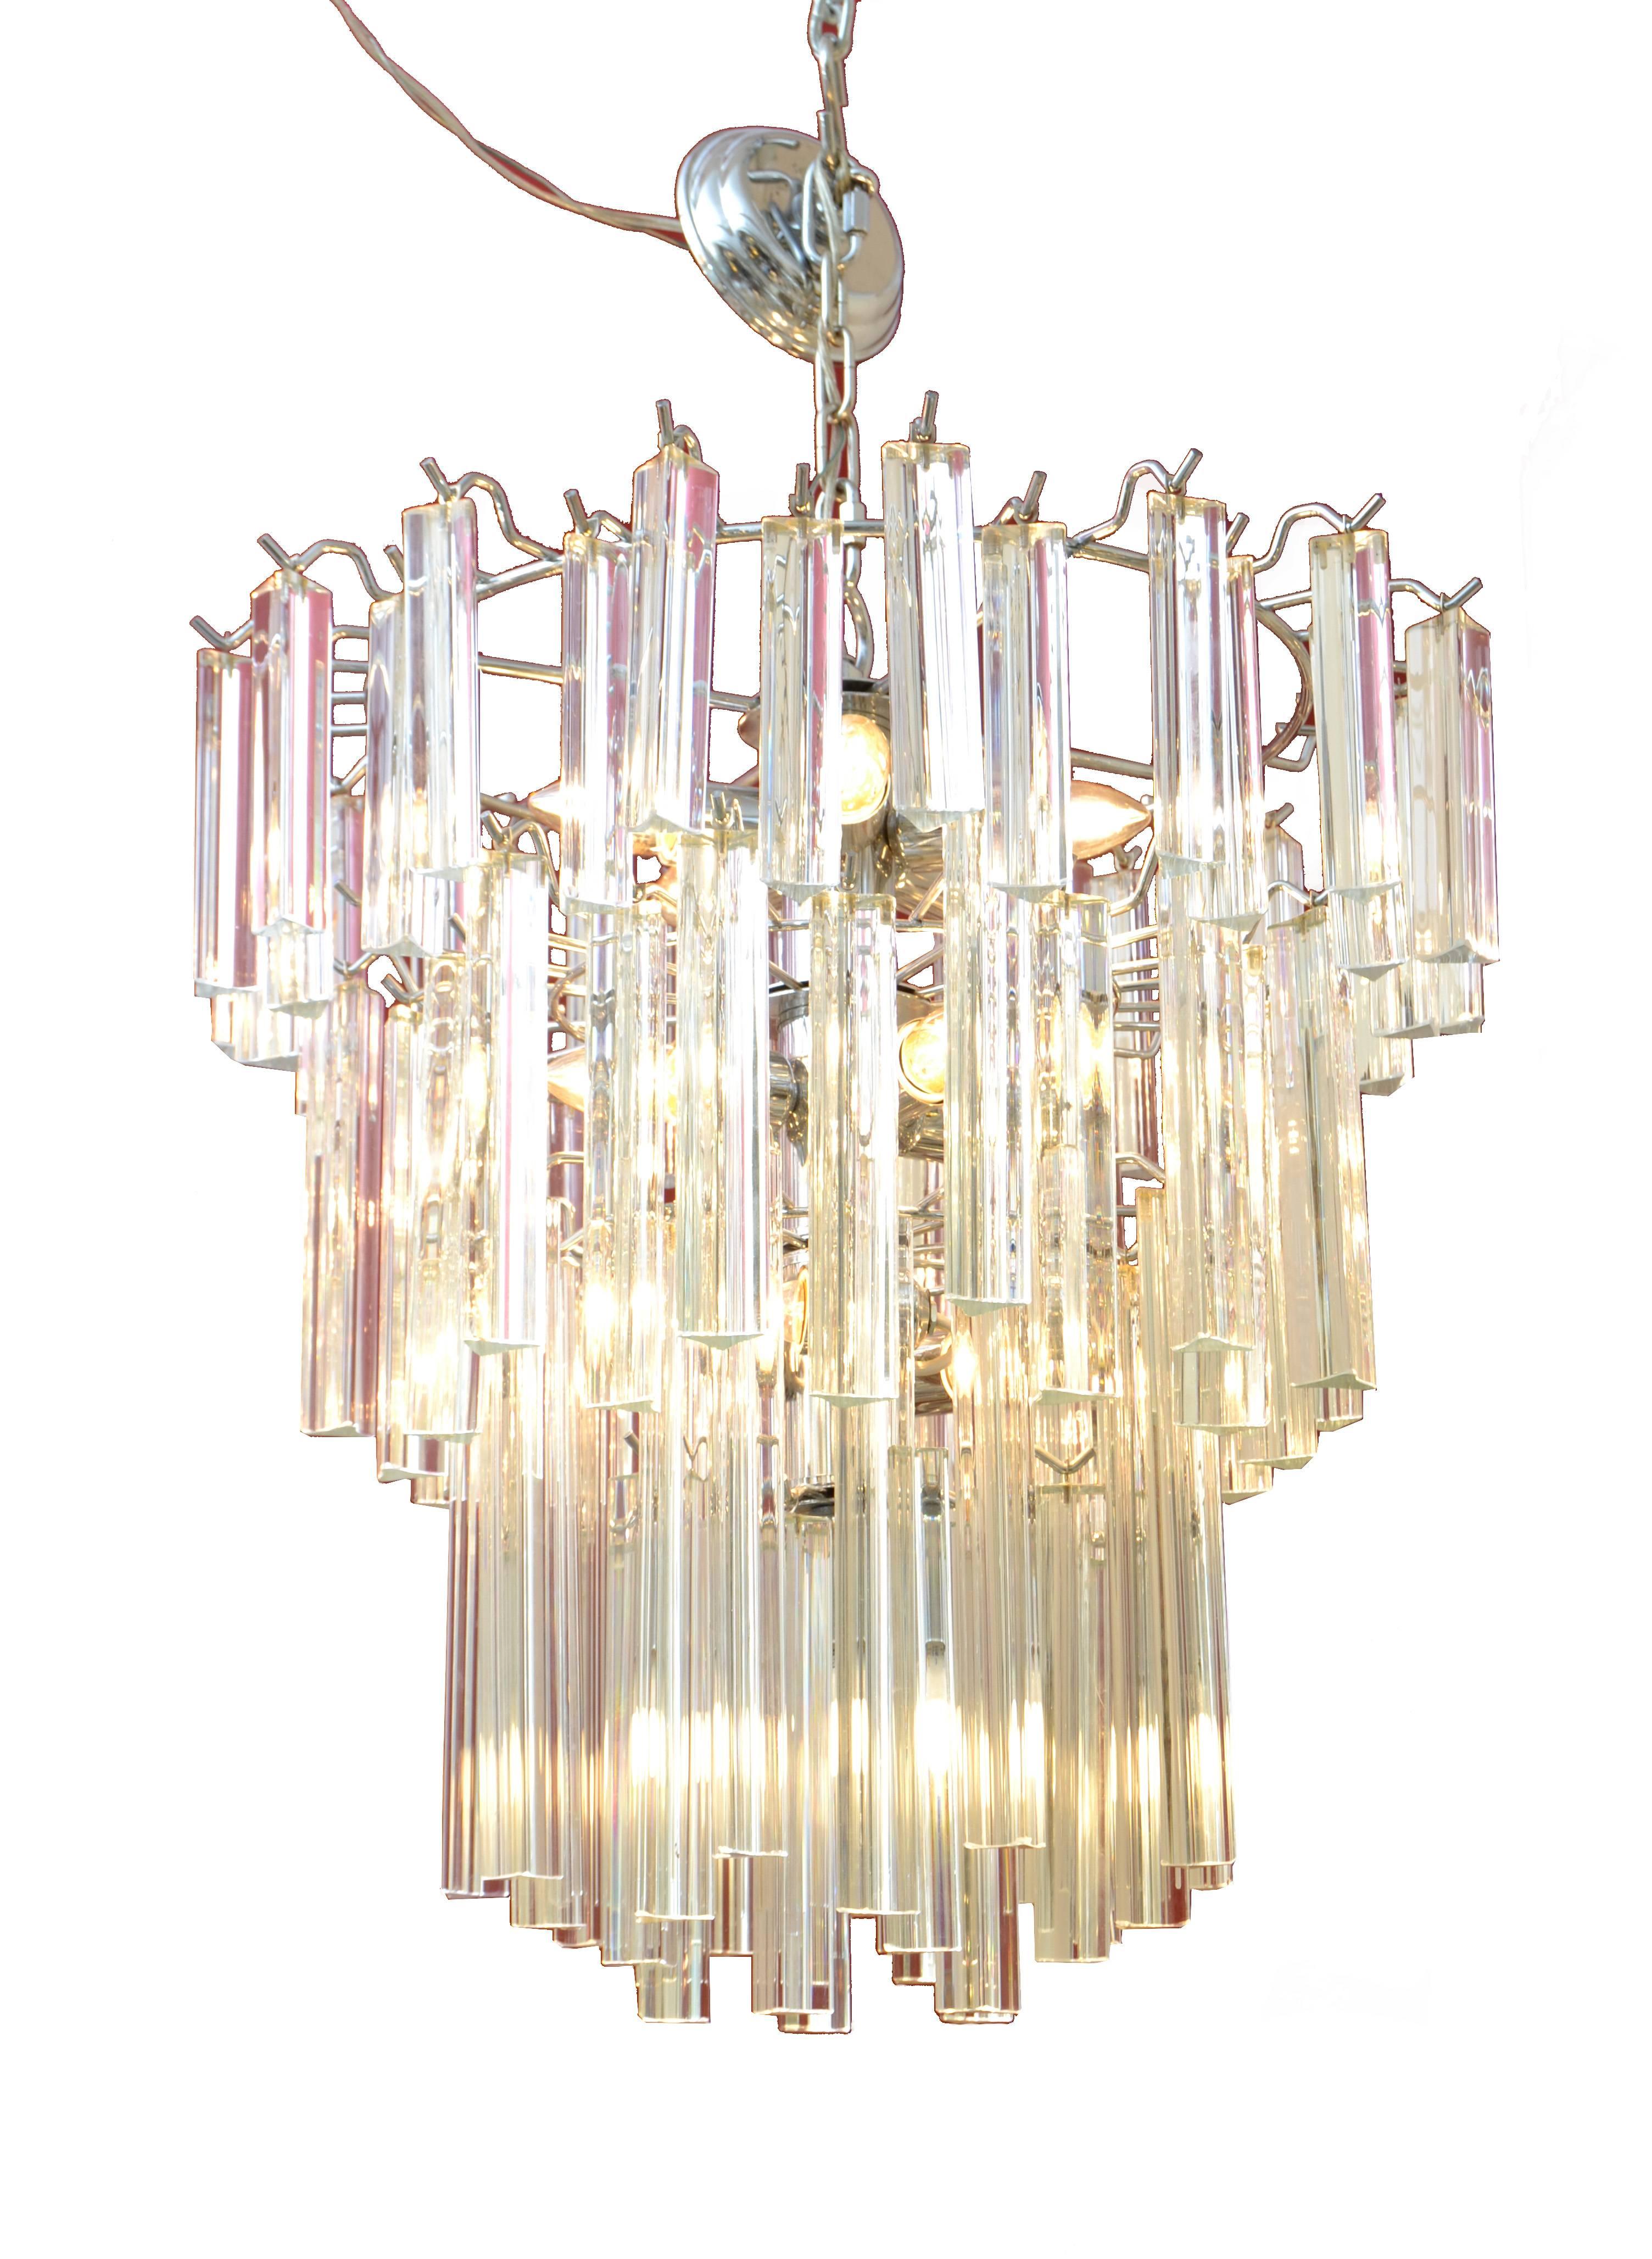 Modern round tiered crystal and chrome chandelier.
Consisting out of crystals in three different sizes.
In perfect working condition and uses 13 light bulbs with max 40 watts.
Comes with canopy and chain which is 8 inches long.